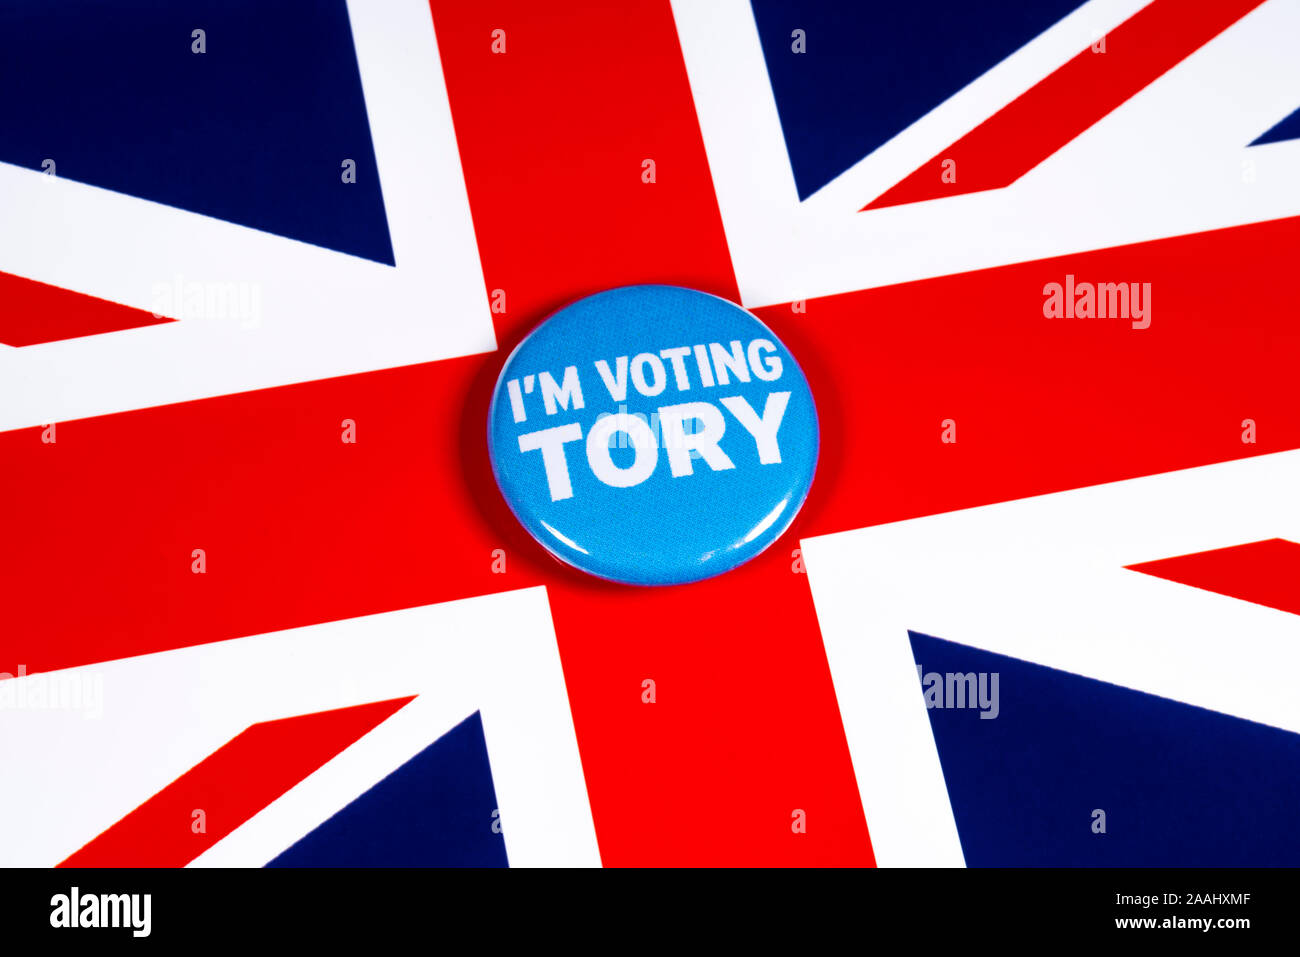 London, UK - November 21st 2019: I’m Voting Tory pin badge, pictured over the United Kingdom flag. The UK General Election is taking place on 12th Dec Stock Photo